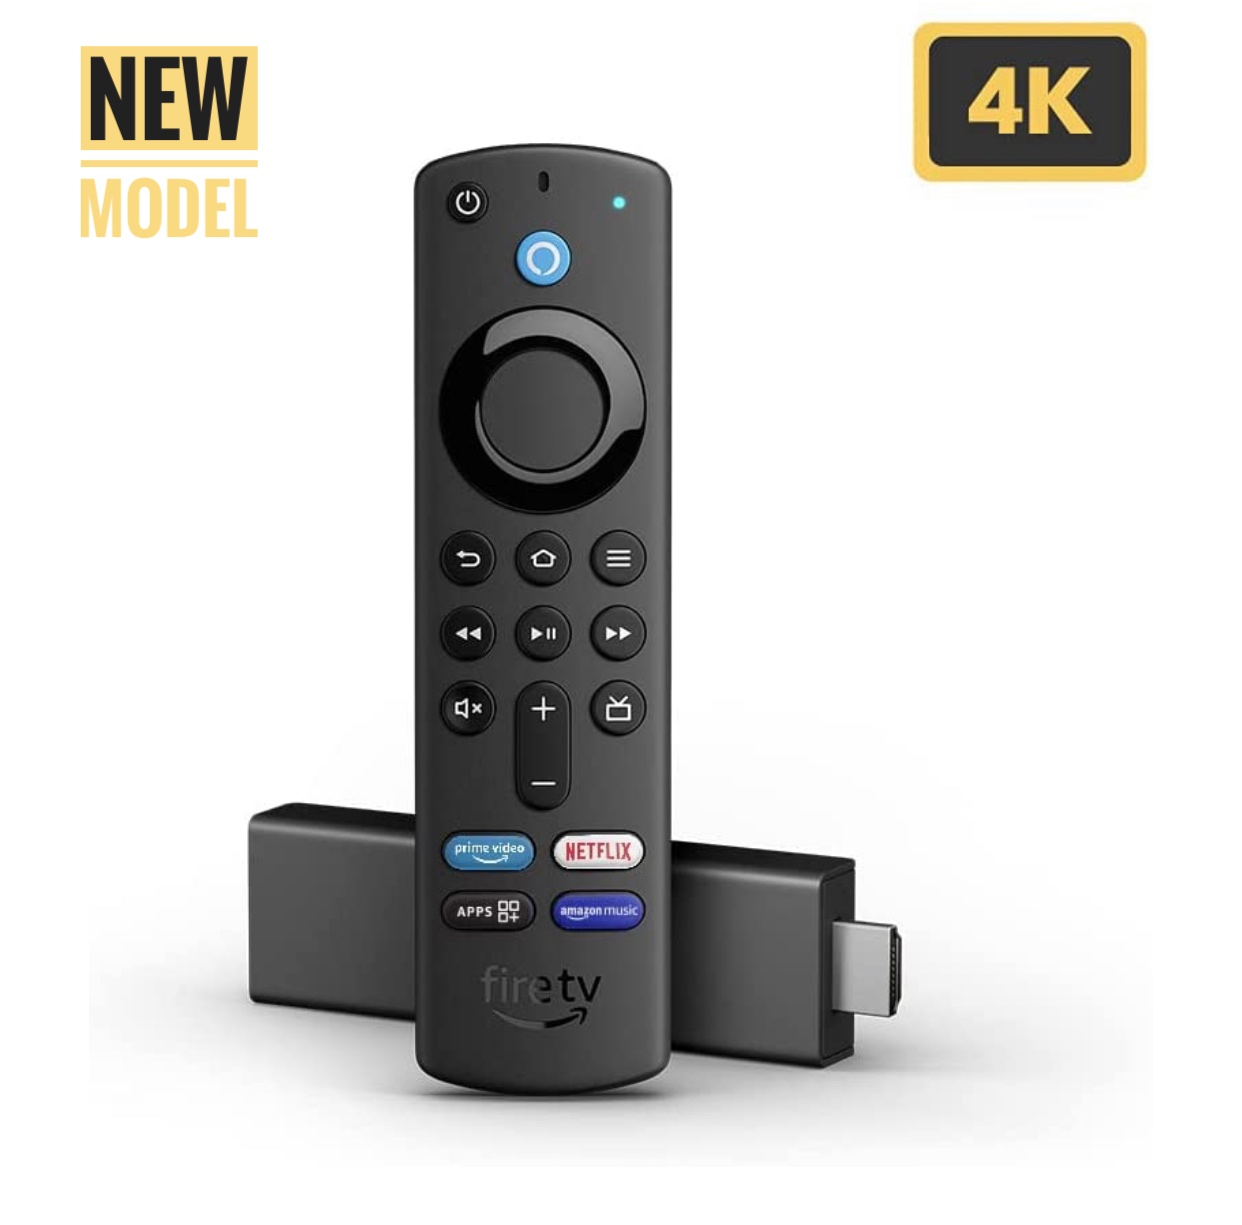 FIRE TV STICK WITH ALL-NEW ALEXA VOICE REMOTE (INCLUDES TV AND APP CONTROLS) HD STREAMING DEVICE